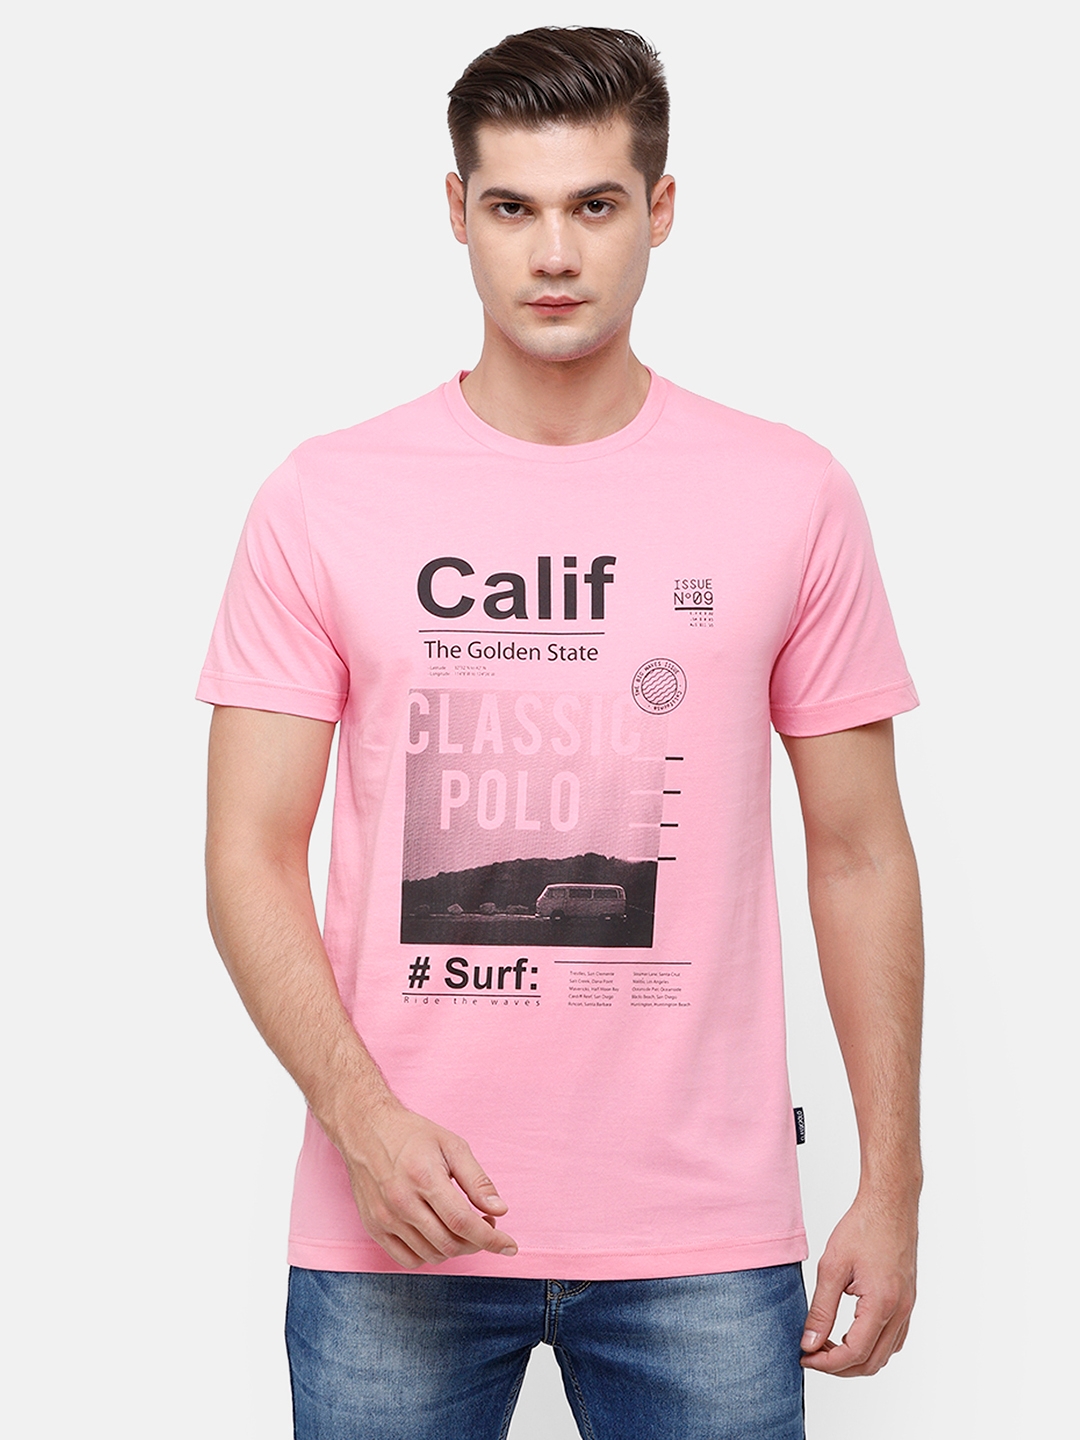 Classic Polo | Classic Polo Mens Half Sleeve Solid Single Jersy Crew Neck Anthra Melange & Pink T-Shirt (IRIS - 05 SF C)